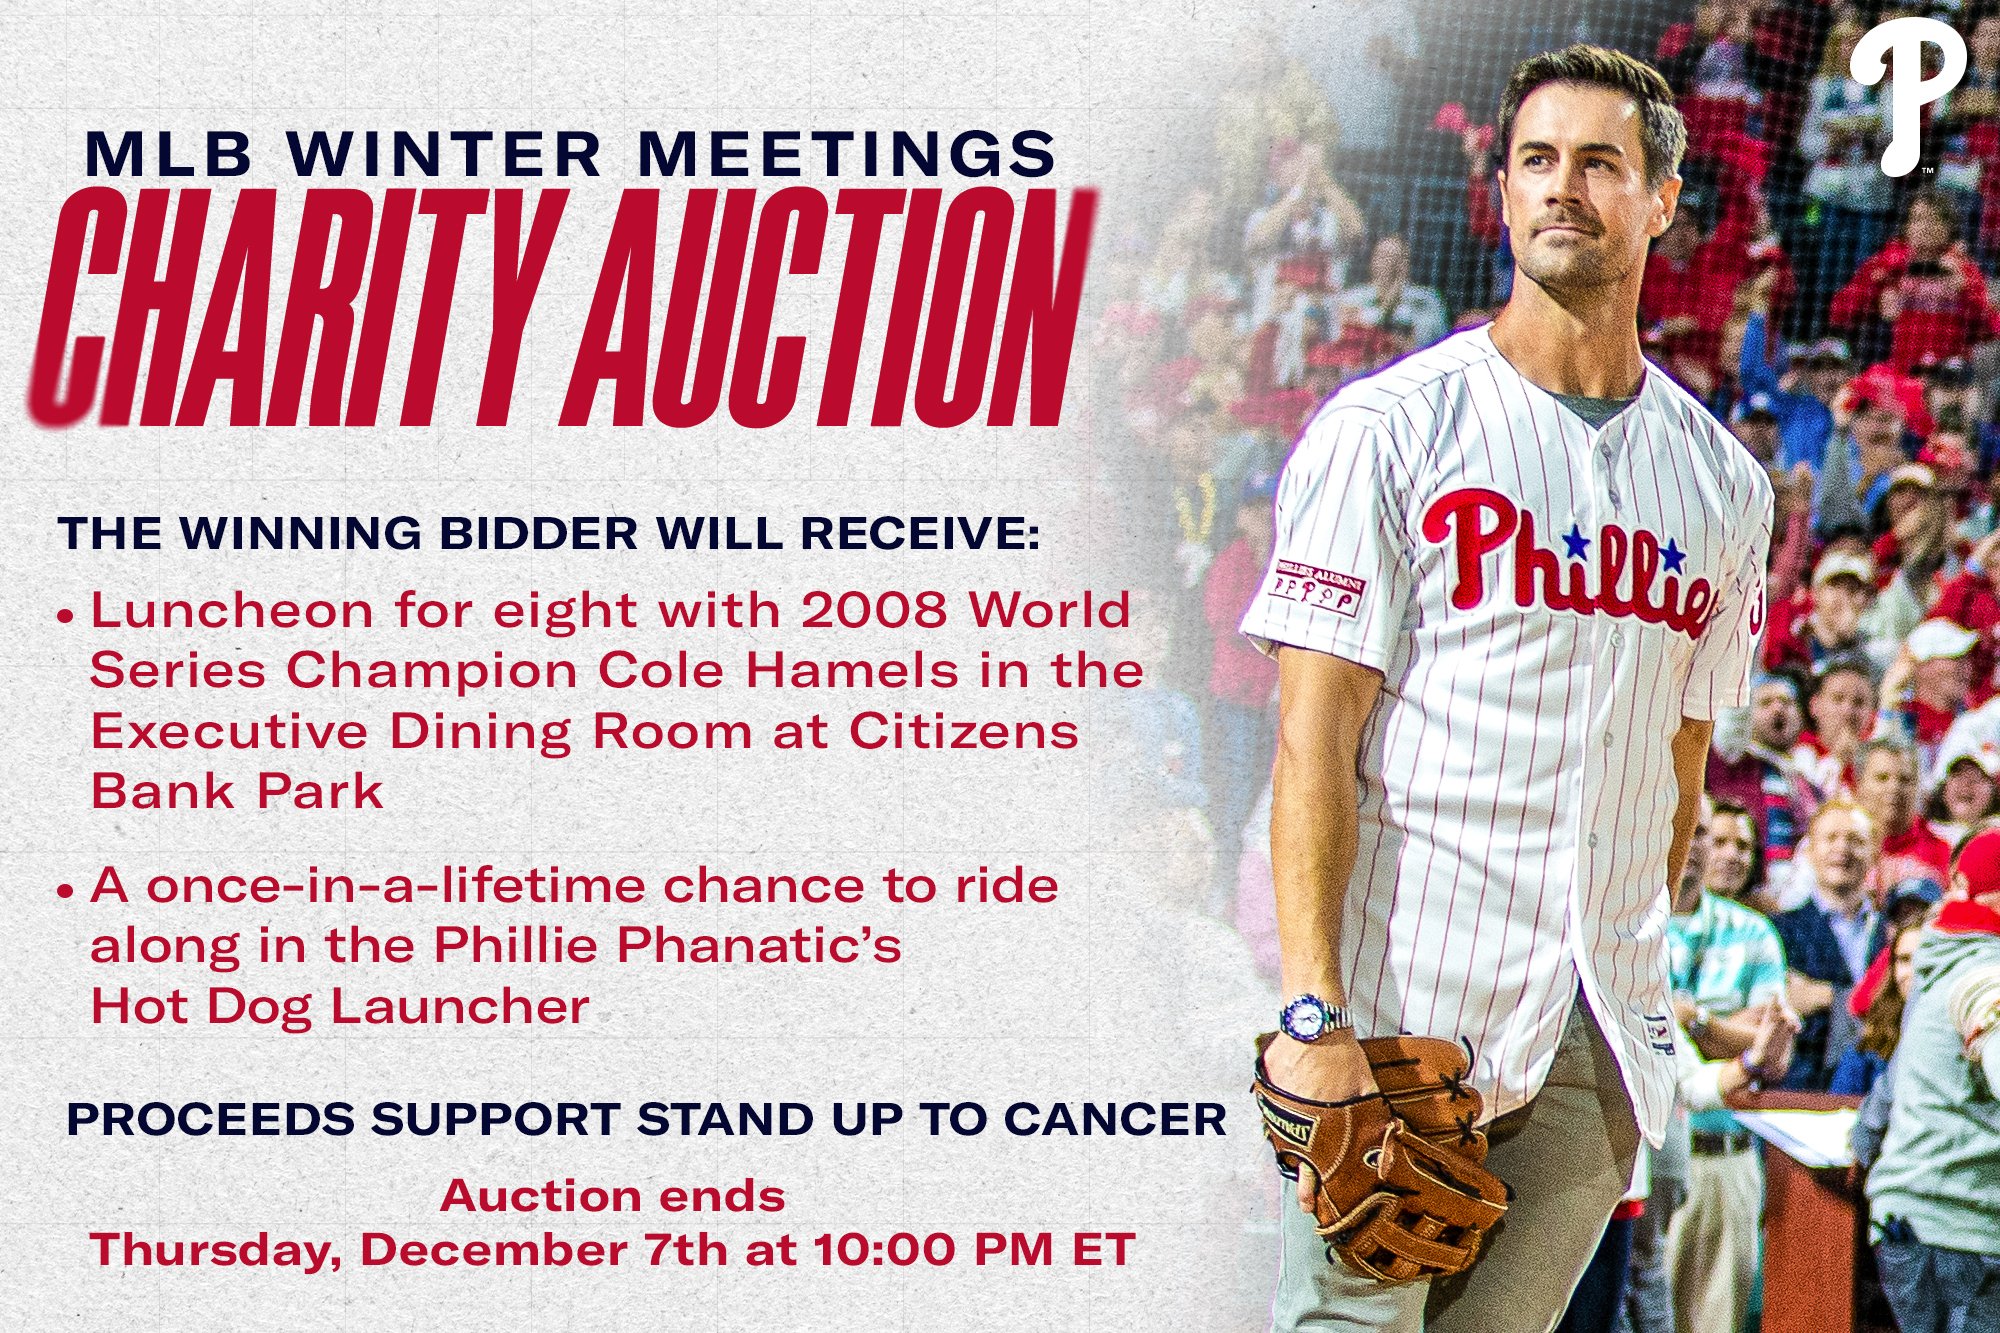 Winter Meetings Charity Auction 2023 to support SU2C